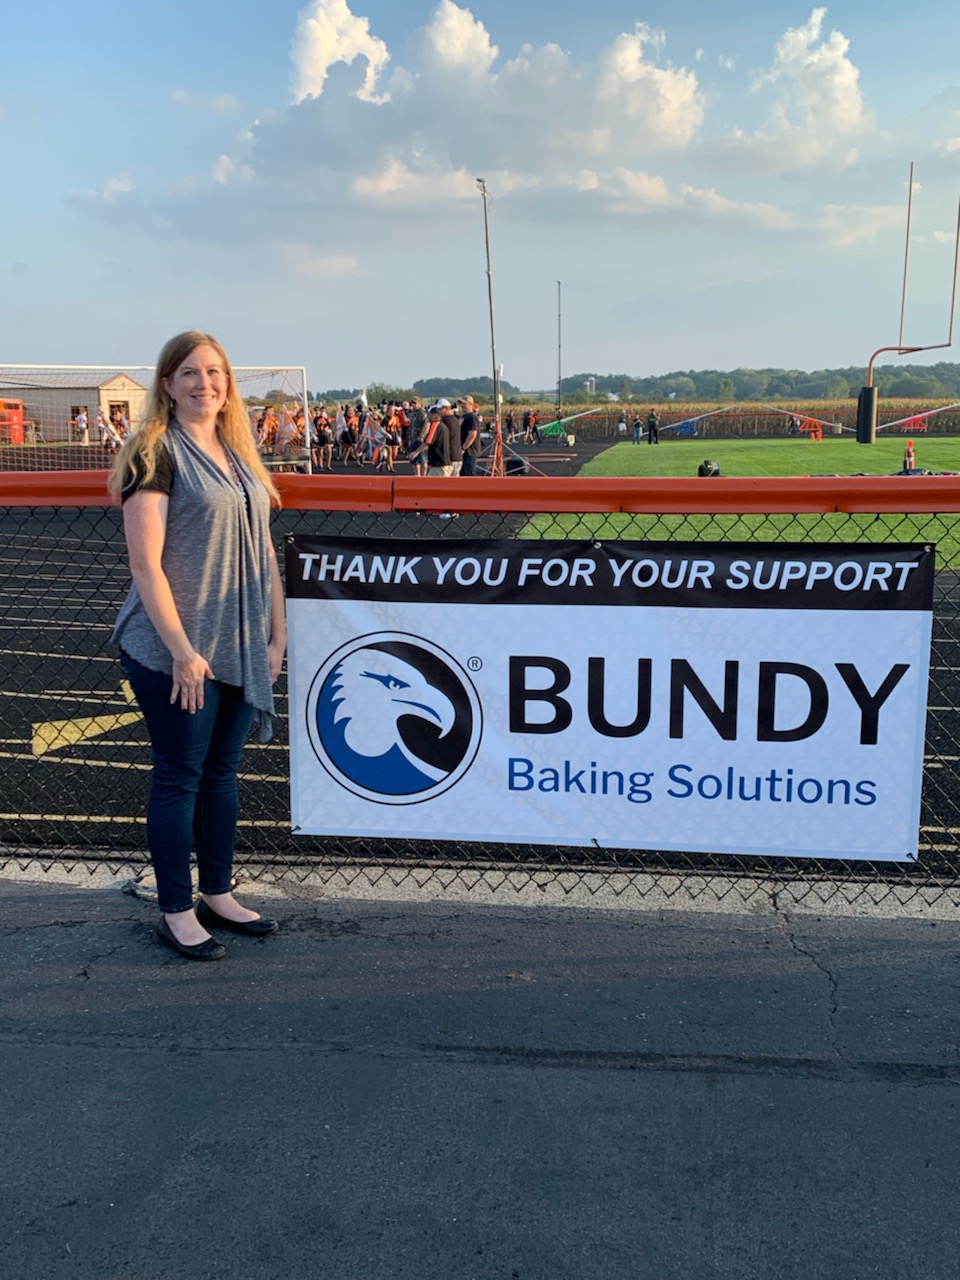 The West Liberty- Salem School District and the West Liberty-Salem Athletic Association would like to thank Parker Trutec for their generous donation of $25,000.00 towards the Tiger Strong Field House fund.  Thank you, Bundy Baking Solutions!